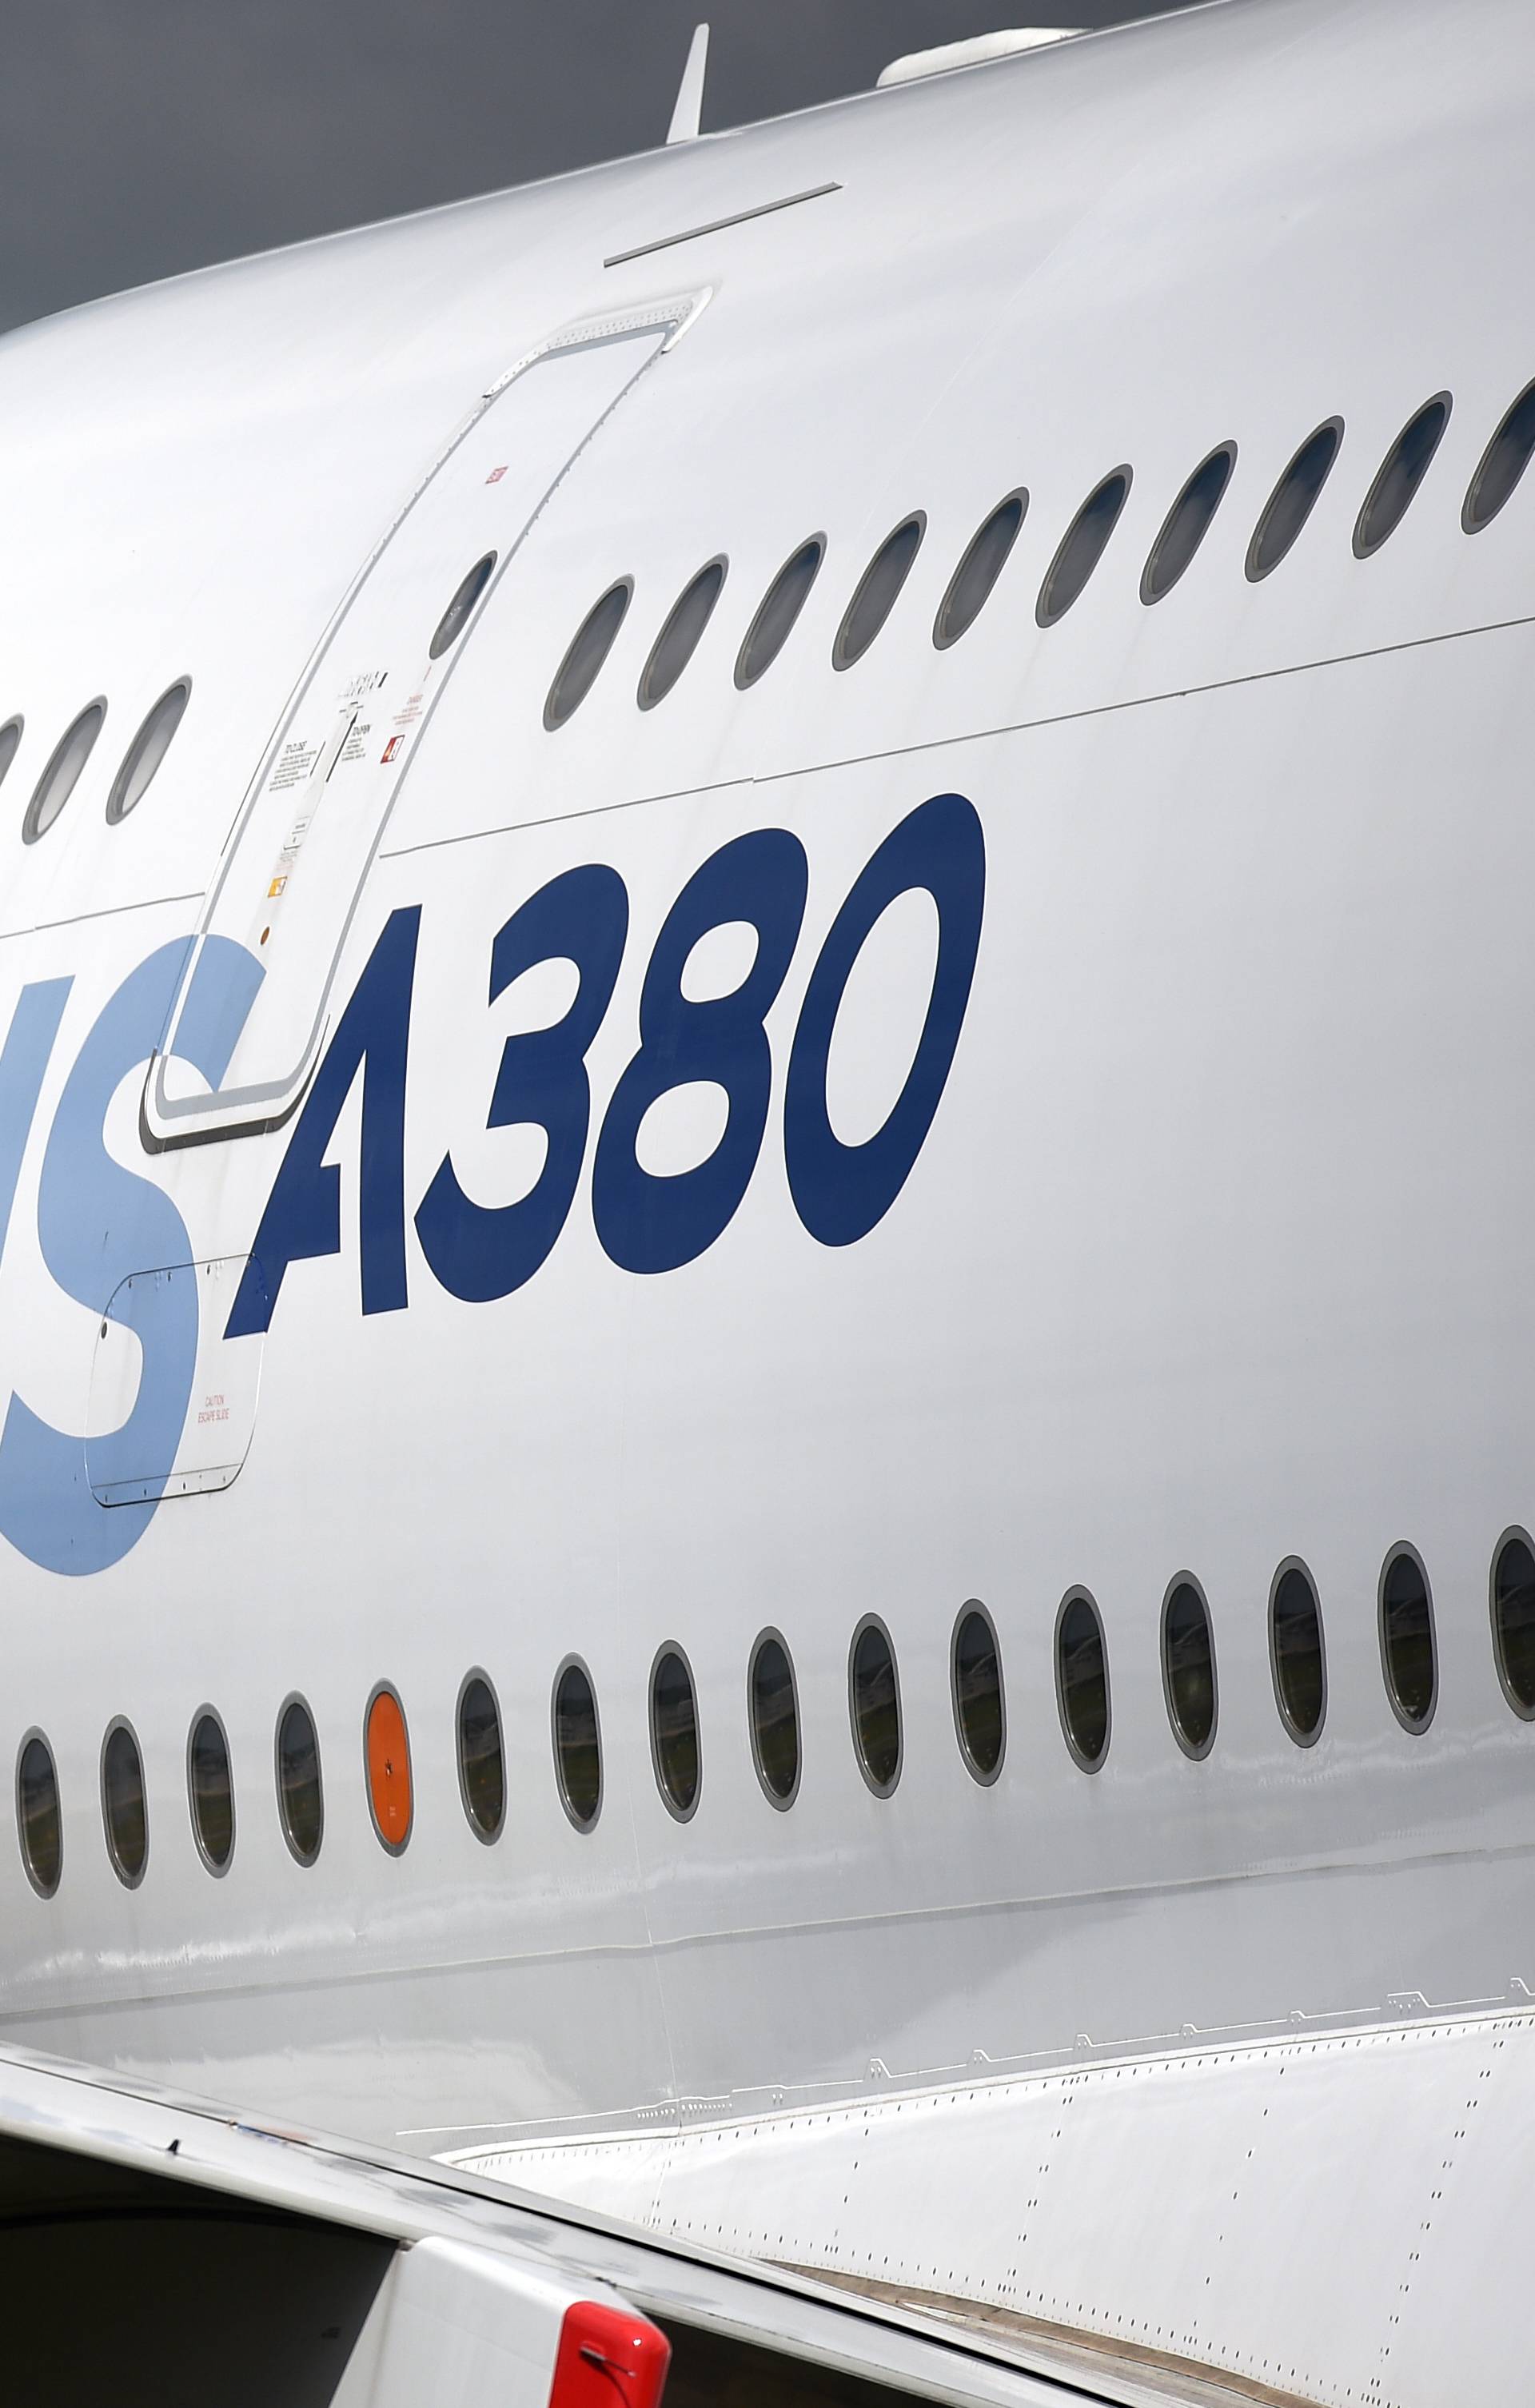 Airbus A380 to cease production